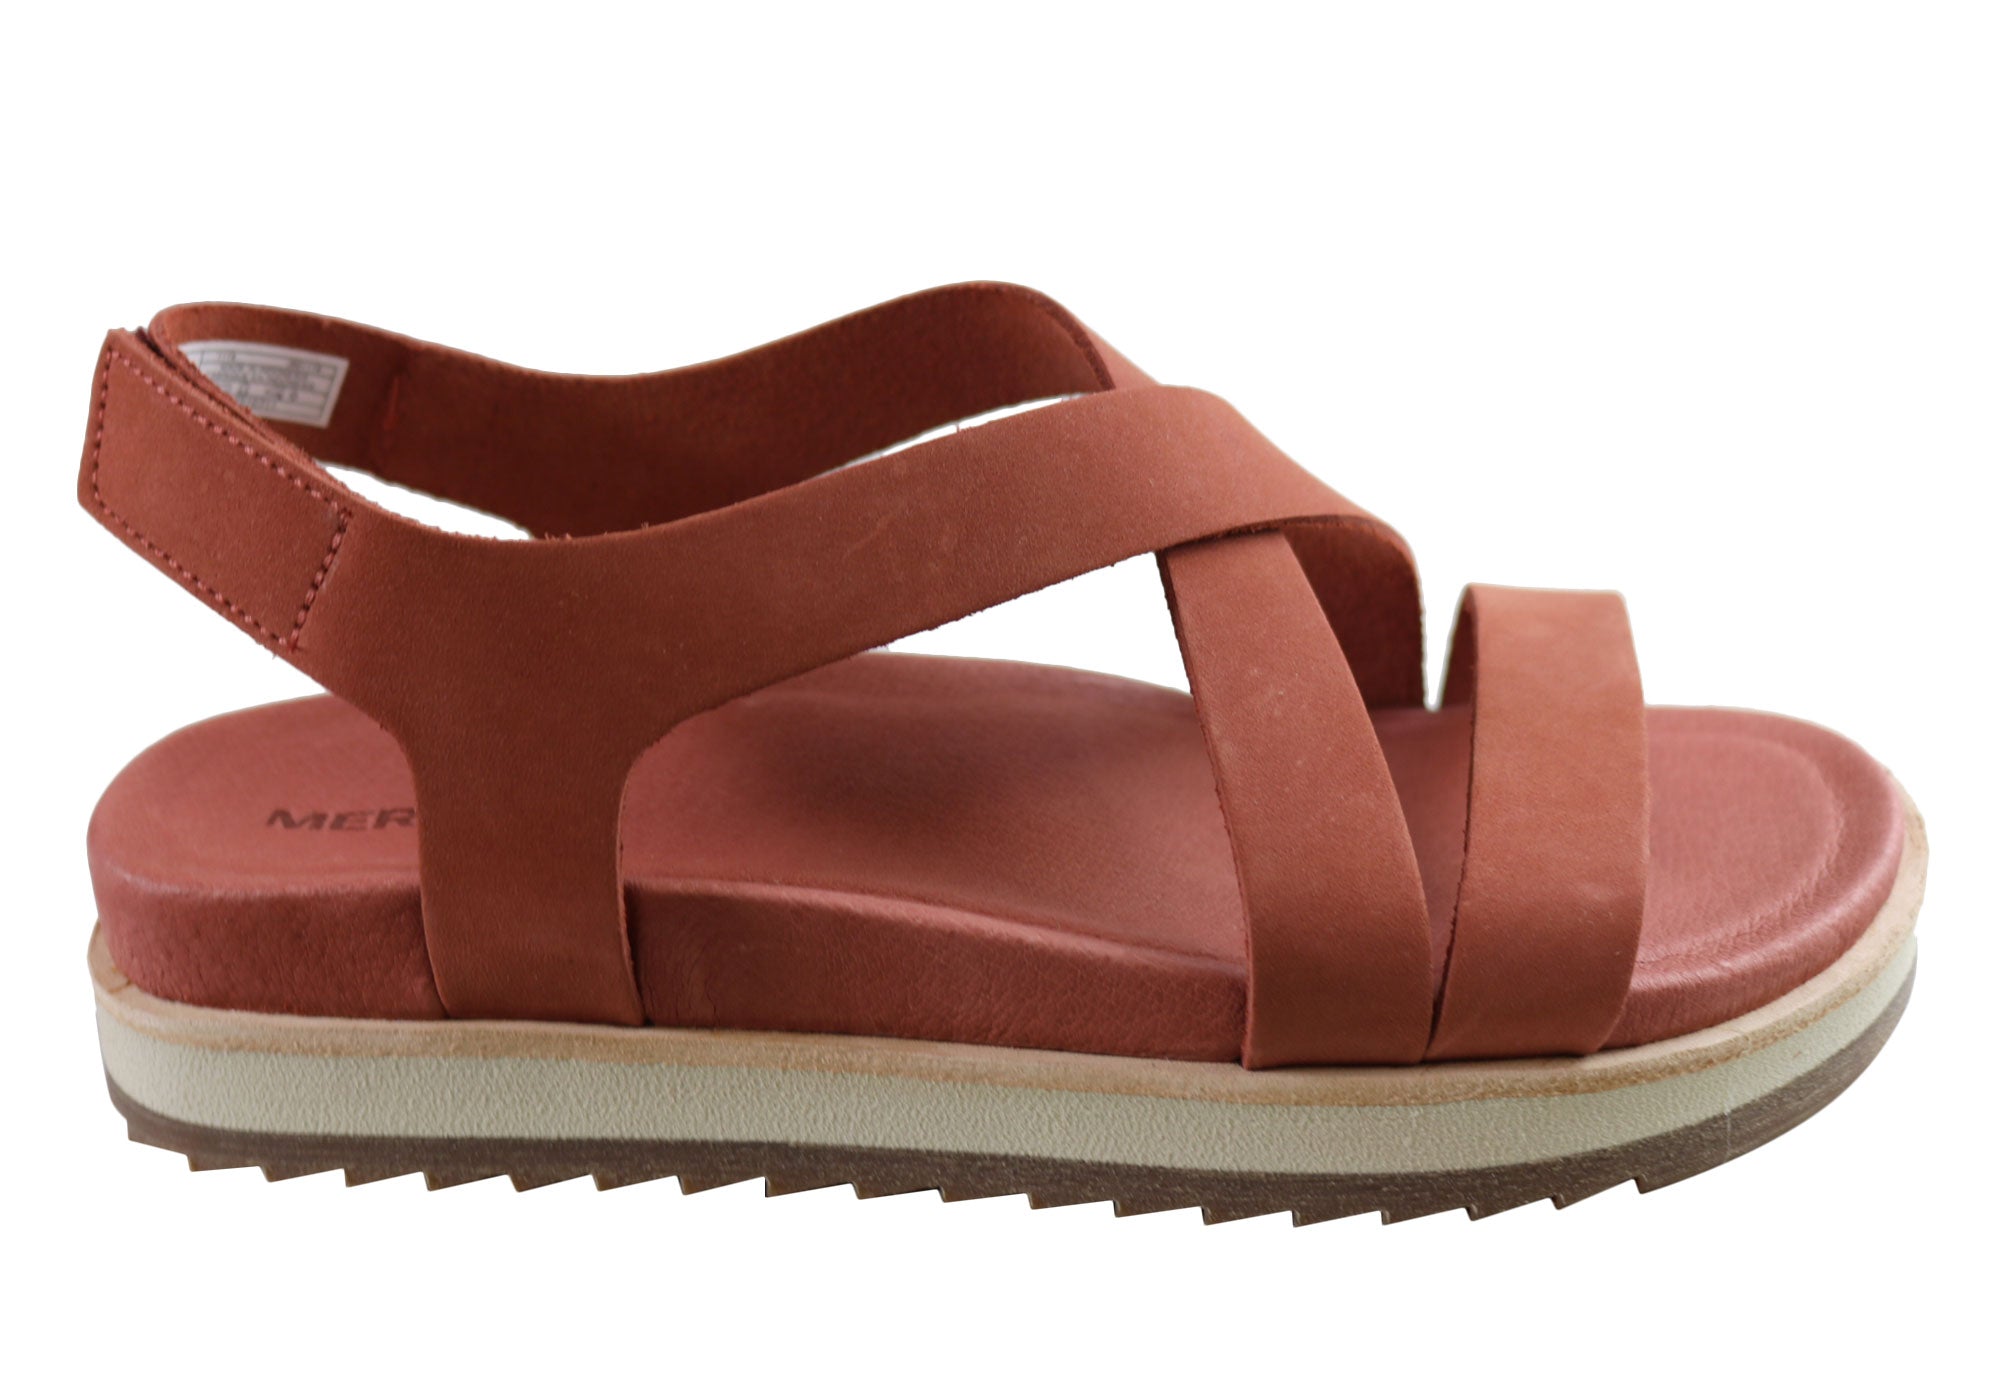 comfortable sandals with backstrap